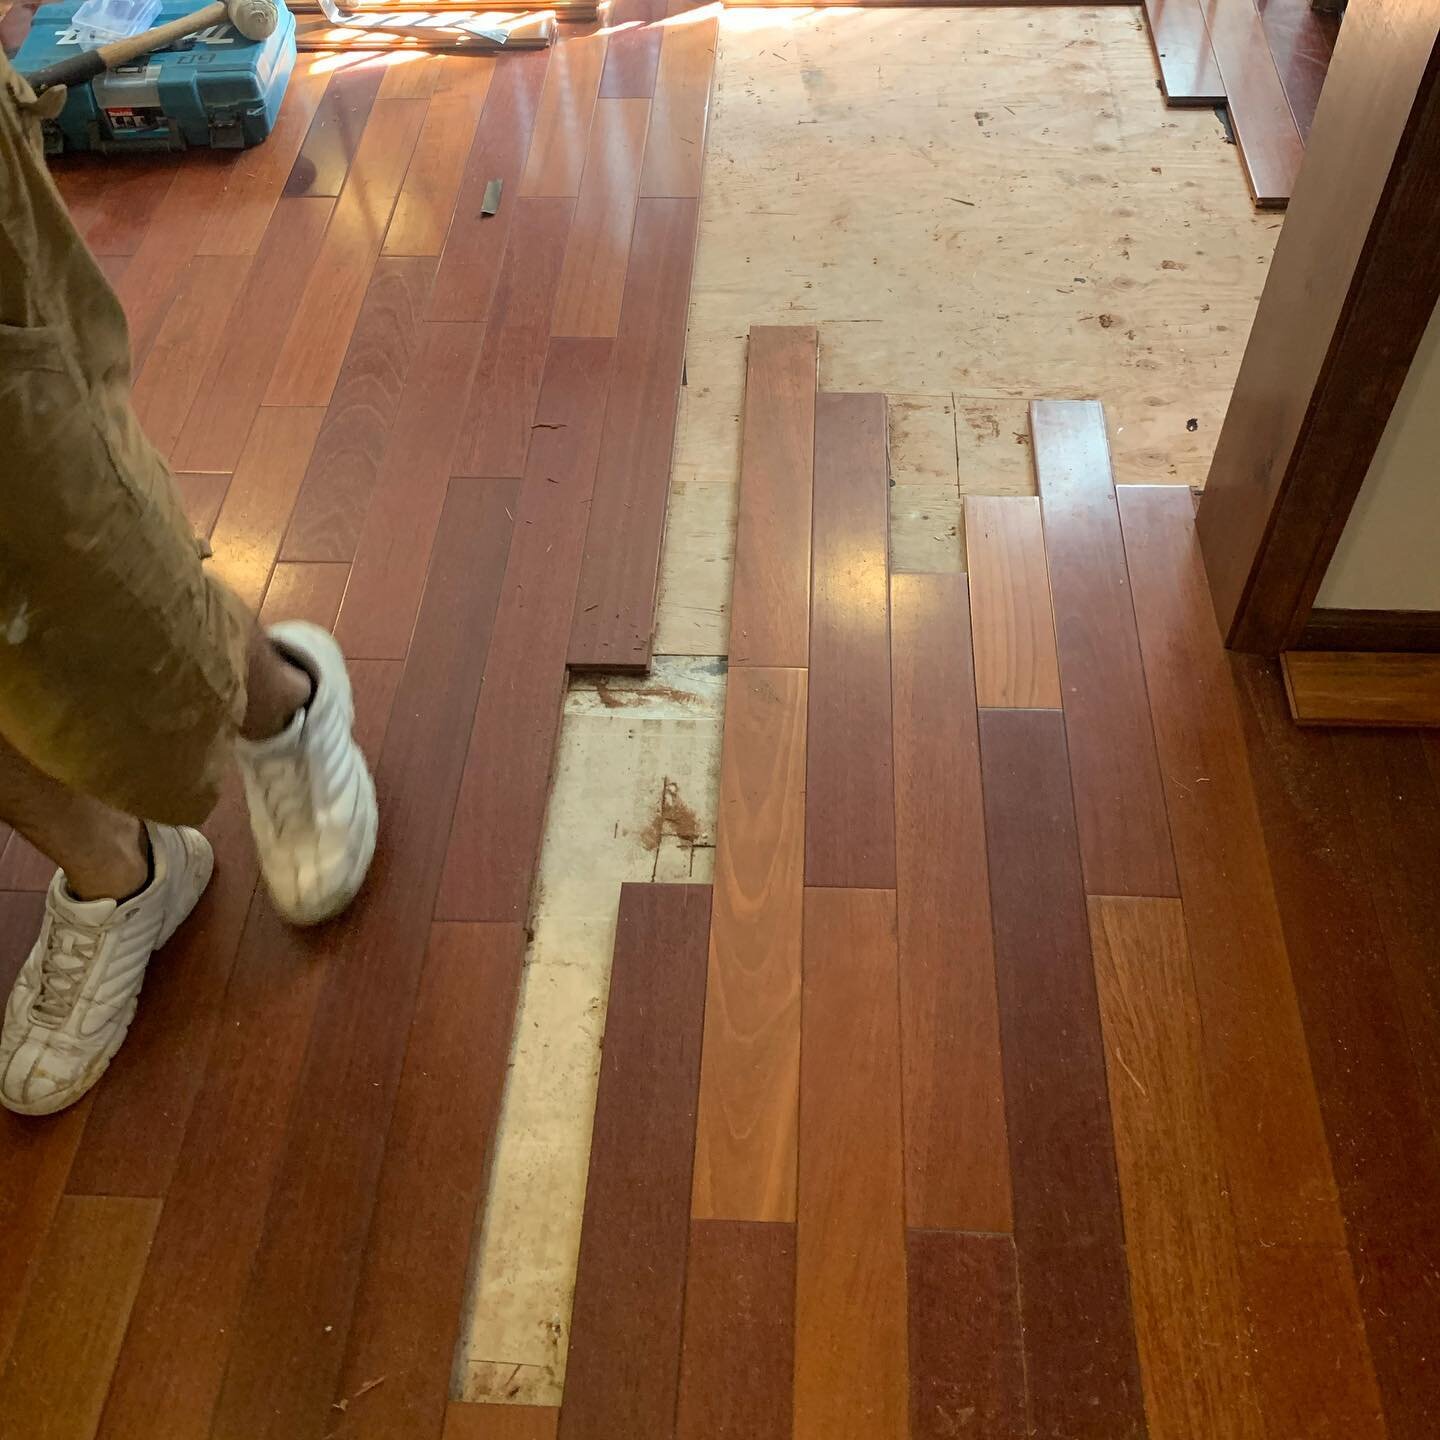 Brazilian cherry prefinished flooring , patched and repaired . www.gqhardwoodfloors.com #patch #repair #cherry #wood #flooring #gq #OneBoardAtaTime